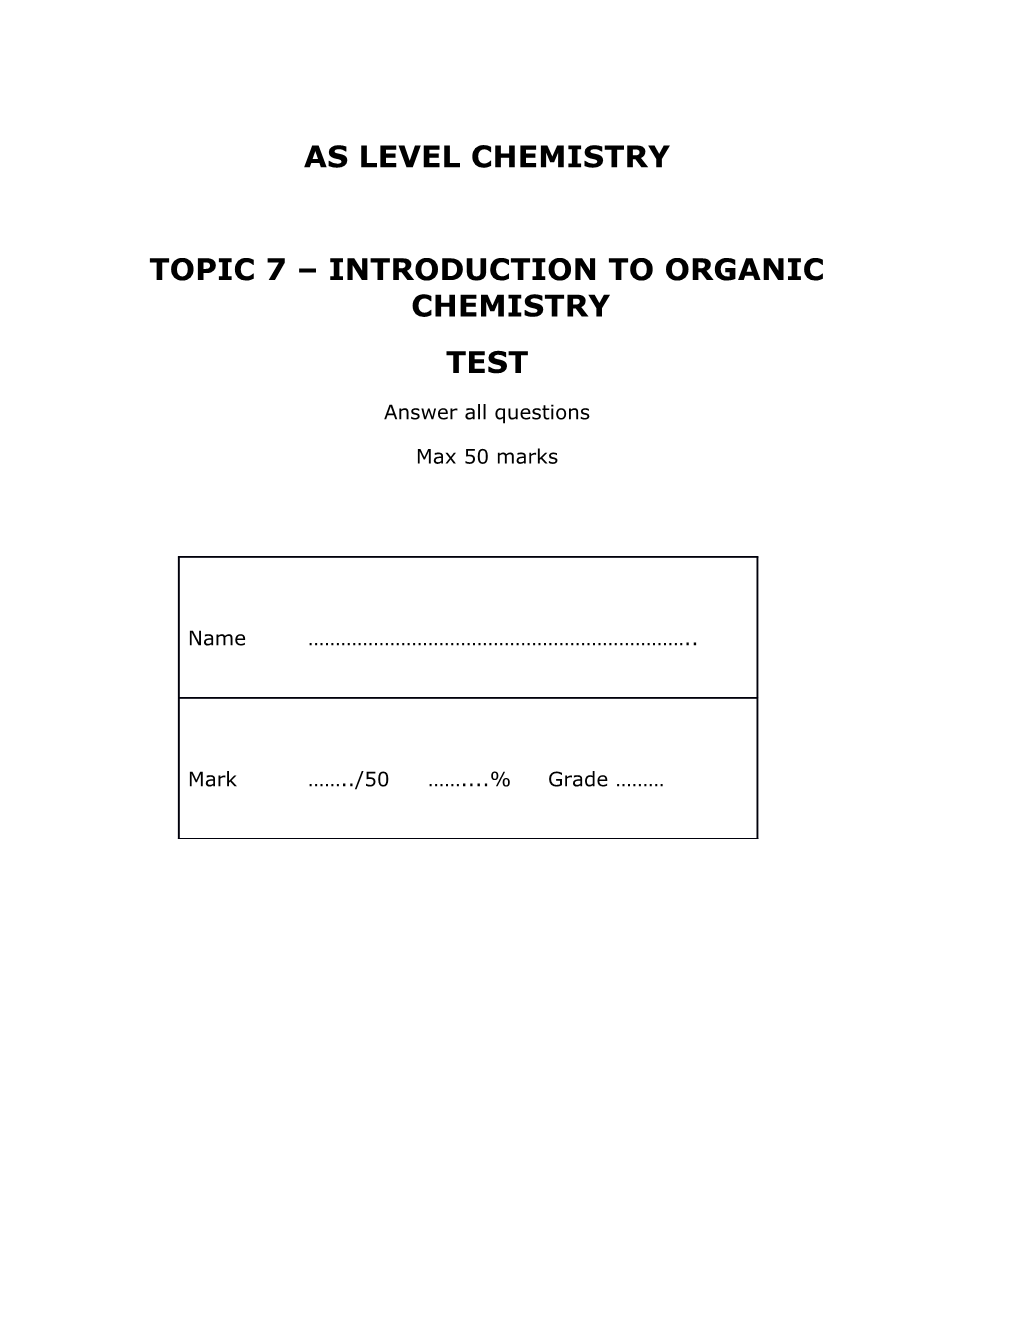 Topic 7 Introduction to Organic Chemistry